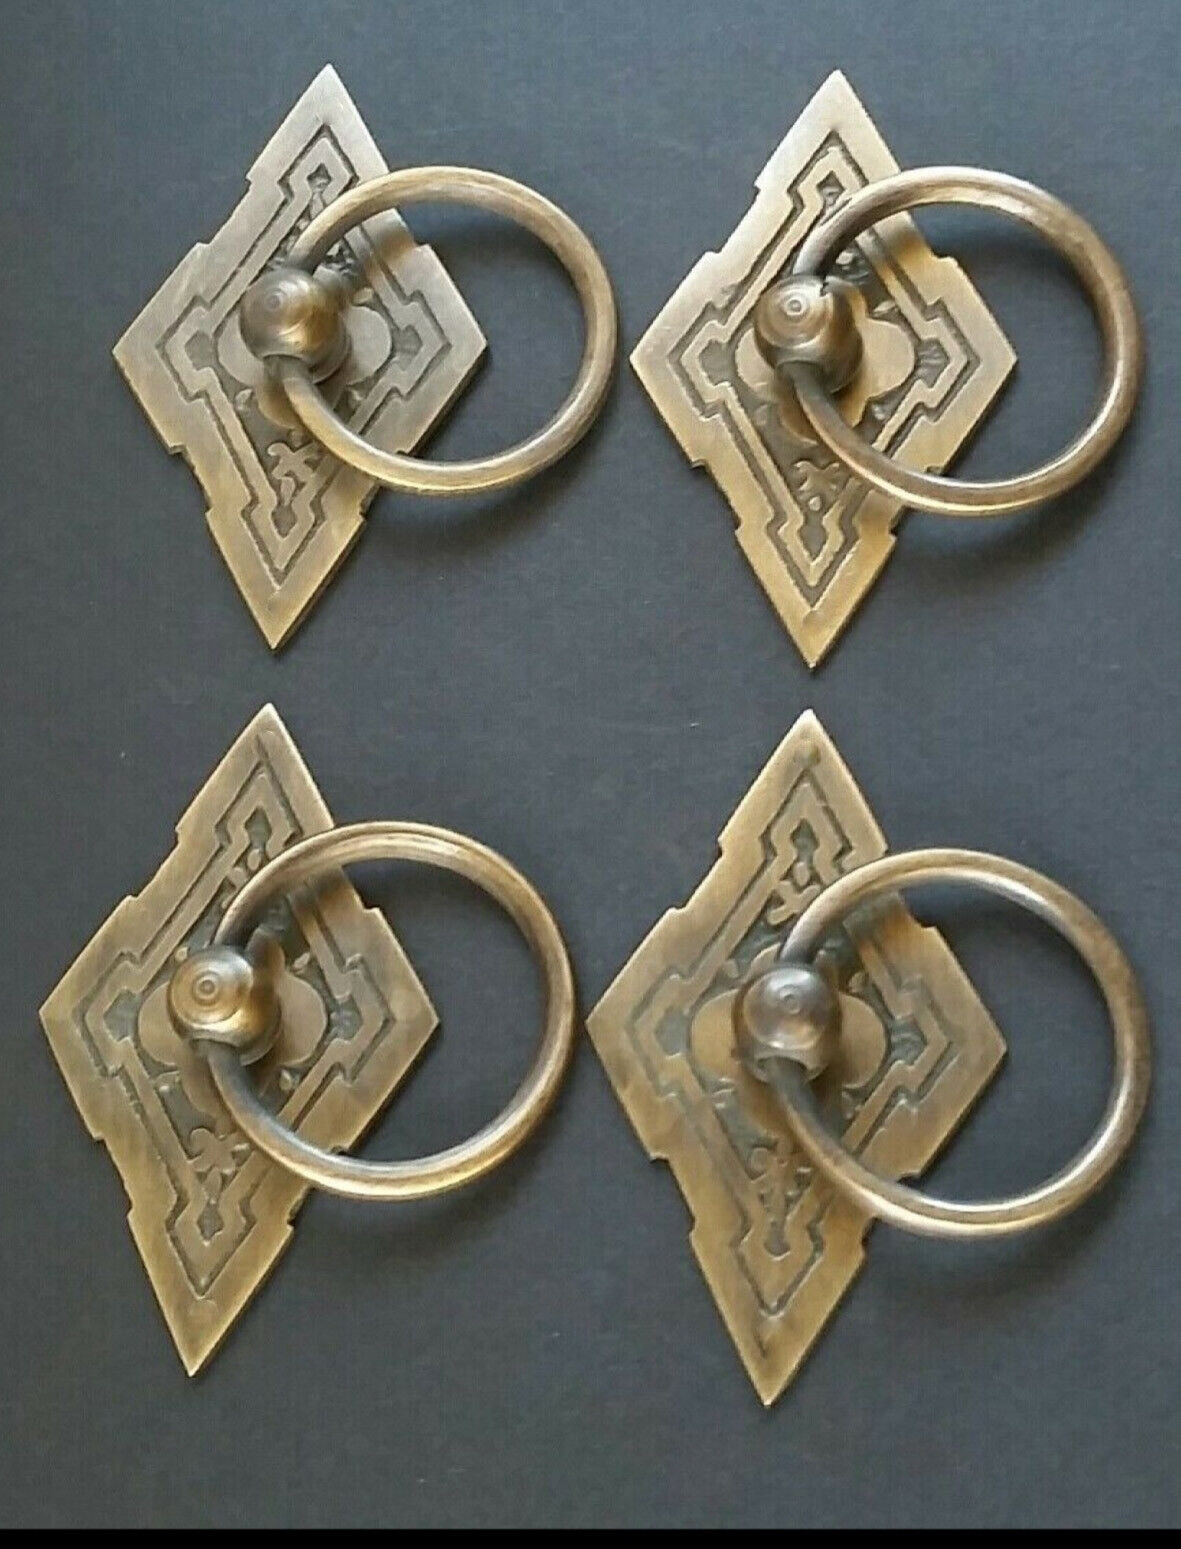 4 x Eastlake Antique Style Brass Ornate Ring Pulls Handles 2-3/8" wide #H15